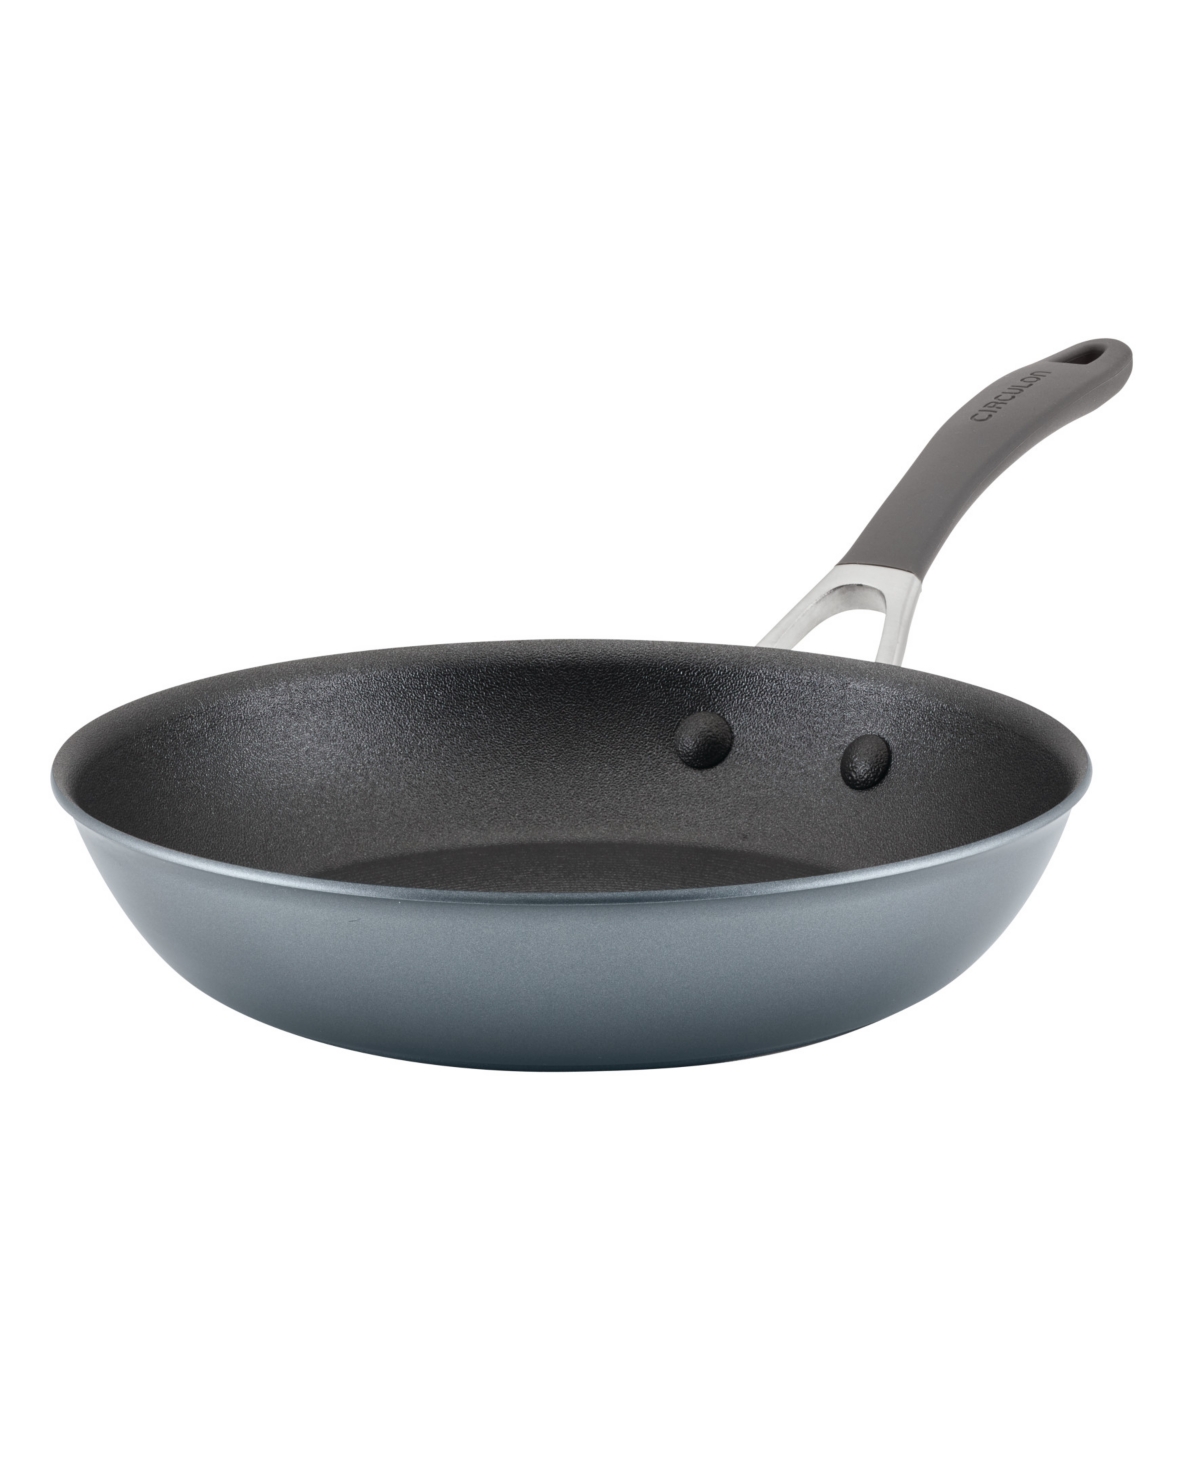 Circulon A1 Series With Scratchdefense Technology Aluminum 10" Nonstick Induction Frying Pan In Graphite